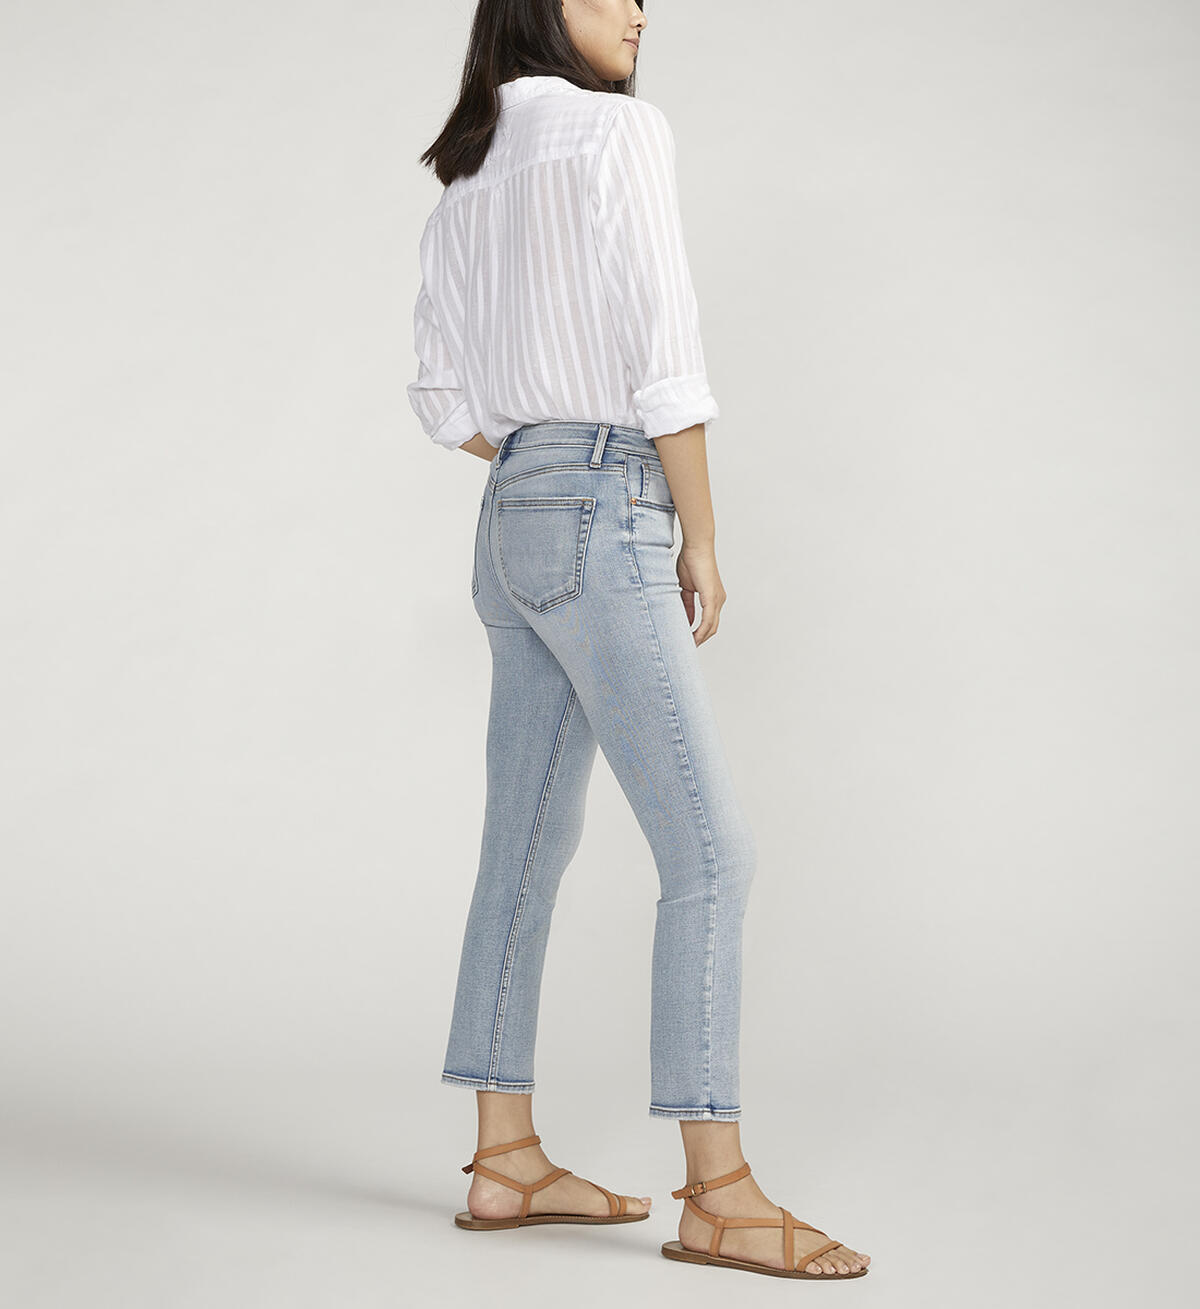 Most Wanted Mid Rise Ankle Straight Jeans, , hi-res image number 2